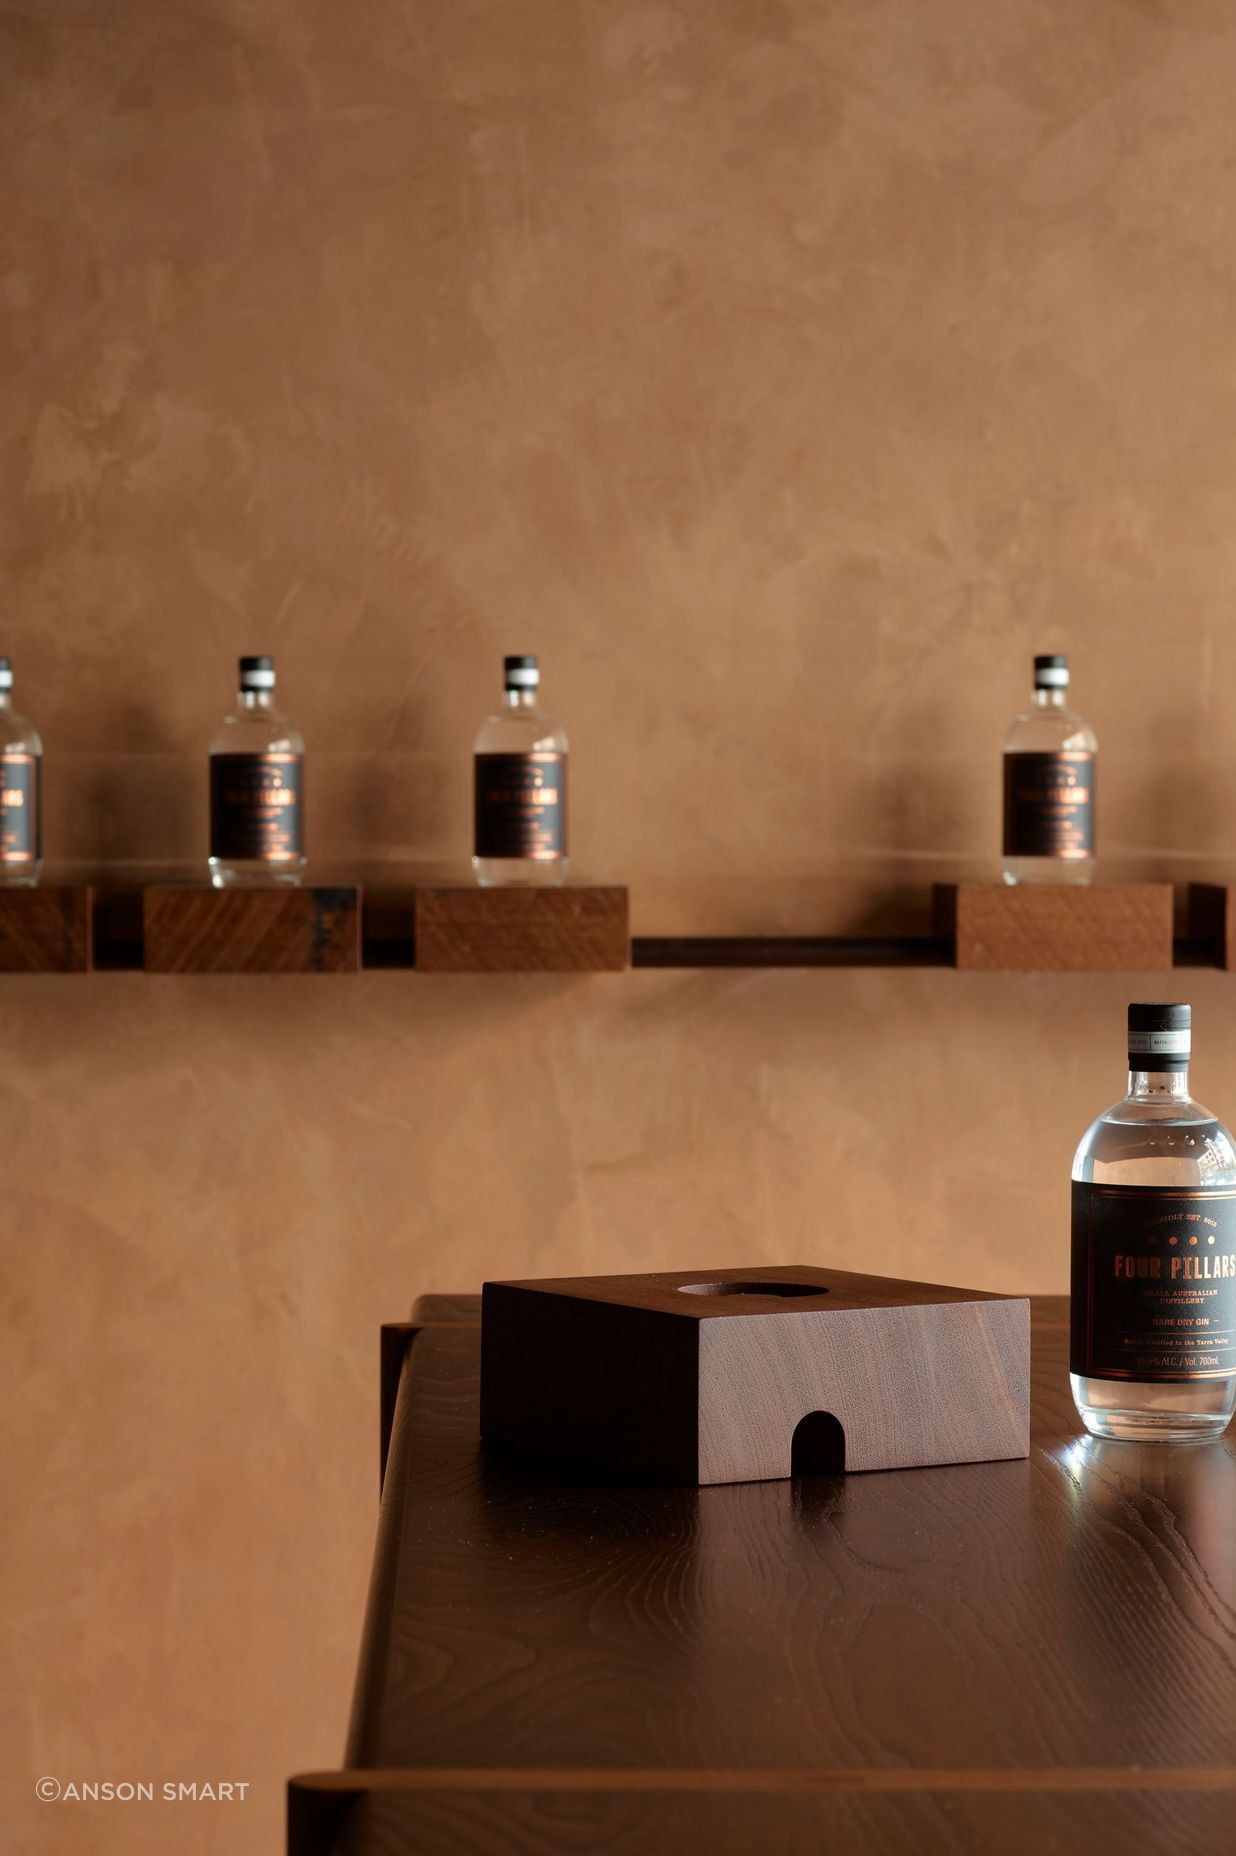 Grooved solid timber blocks with a range of gin bottles can be removed from their metal rail base; instantly converting the store to a cellar door.